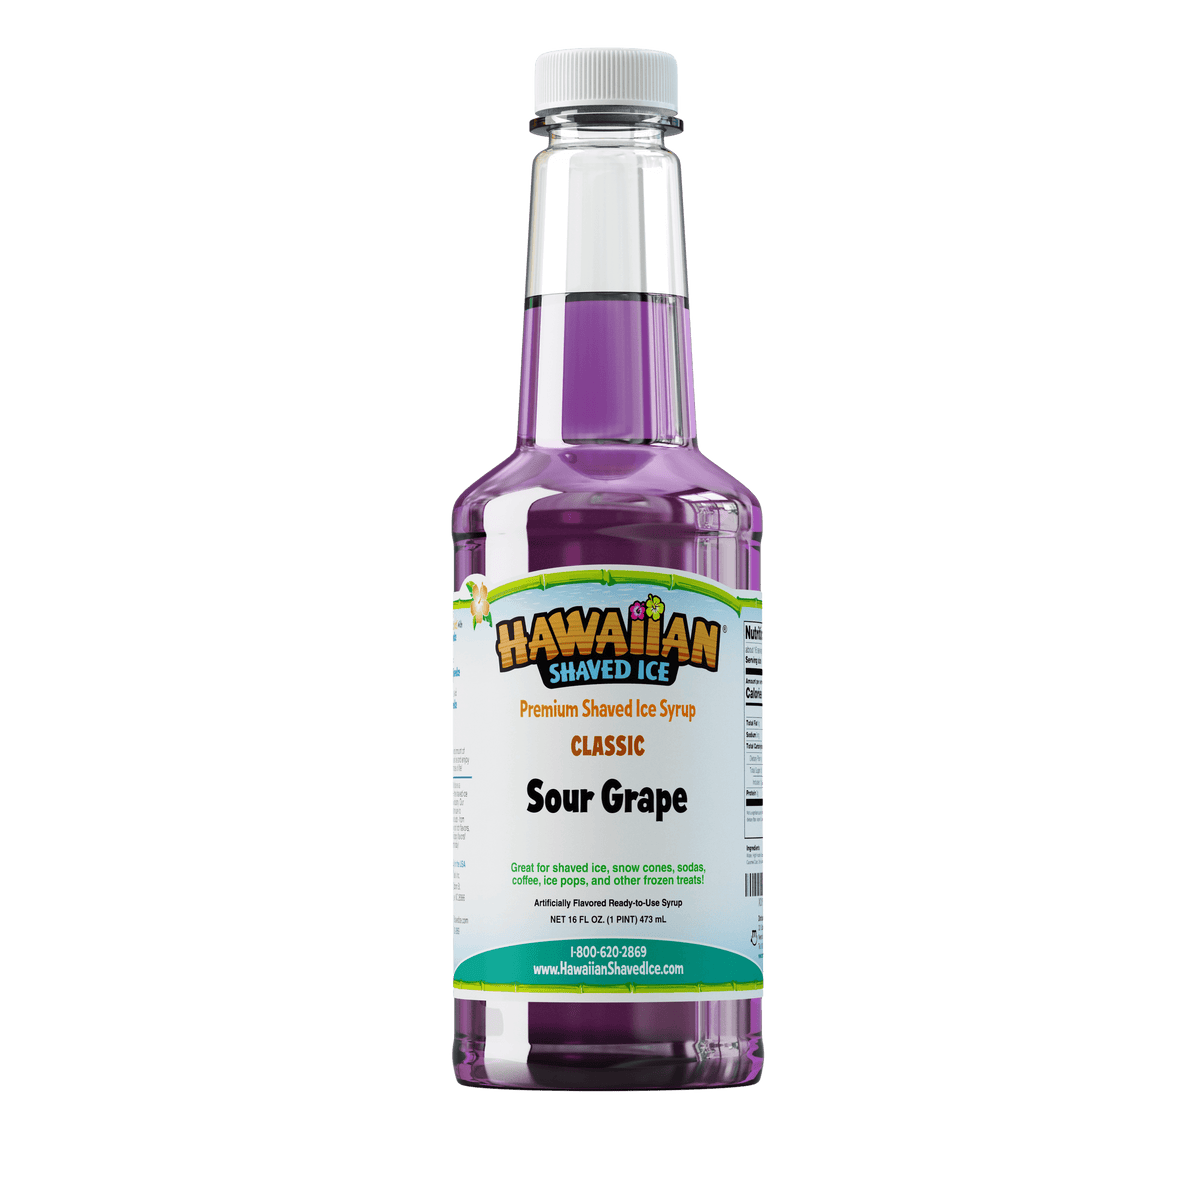  A pint (16-oz) of Hawaiian Shaved Ice Sour Grape Flavored syrup, Purple